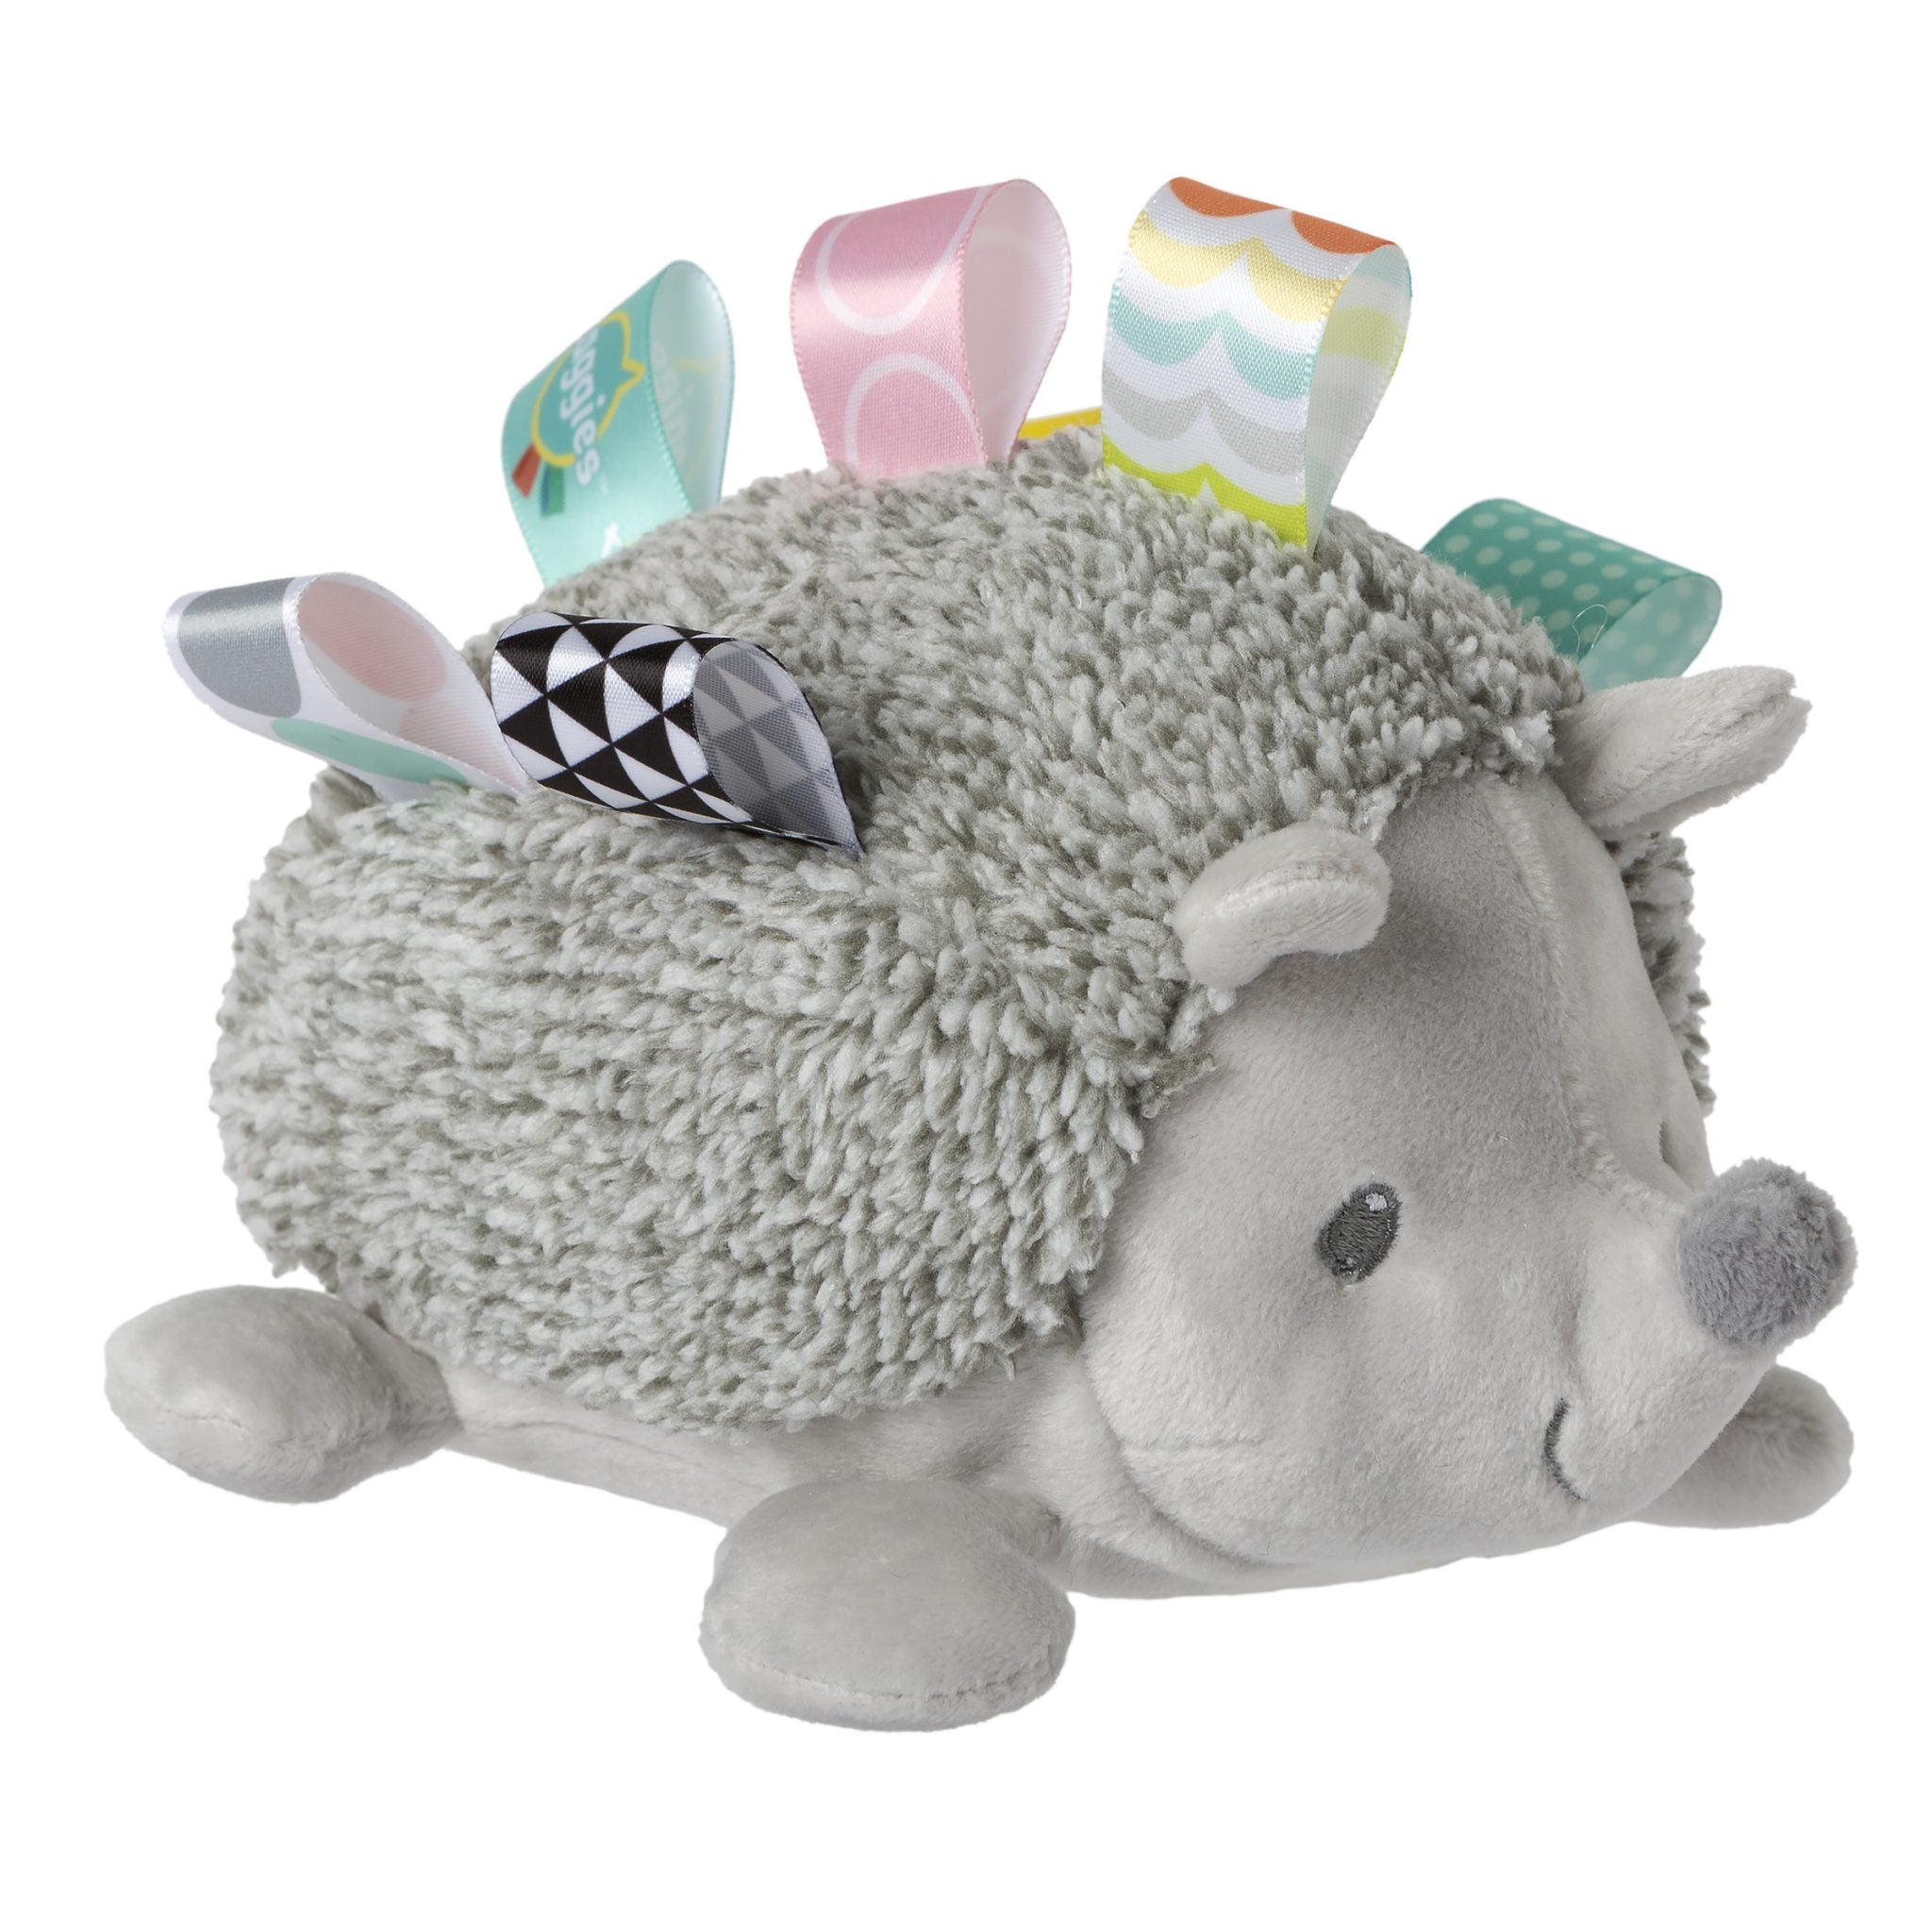 Taggies Heather Hedgehog Squeeze & Squeak by Mary Meyer